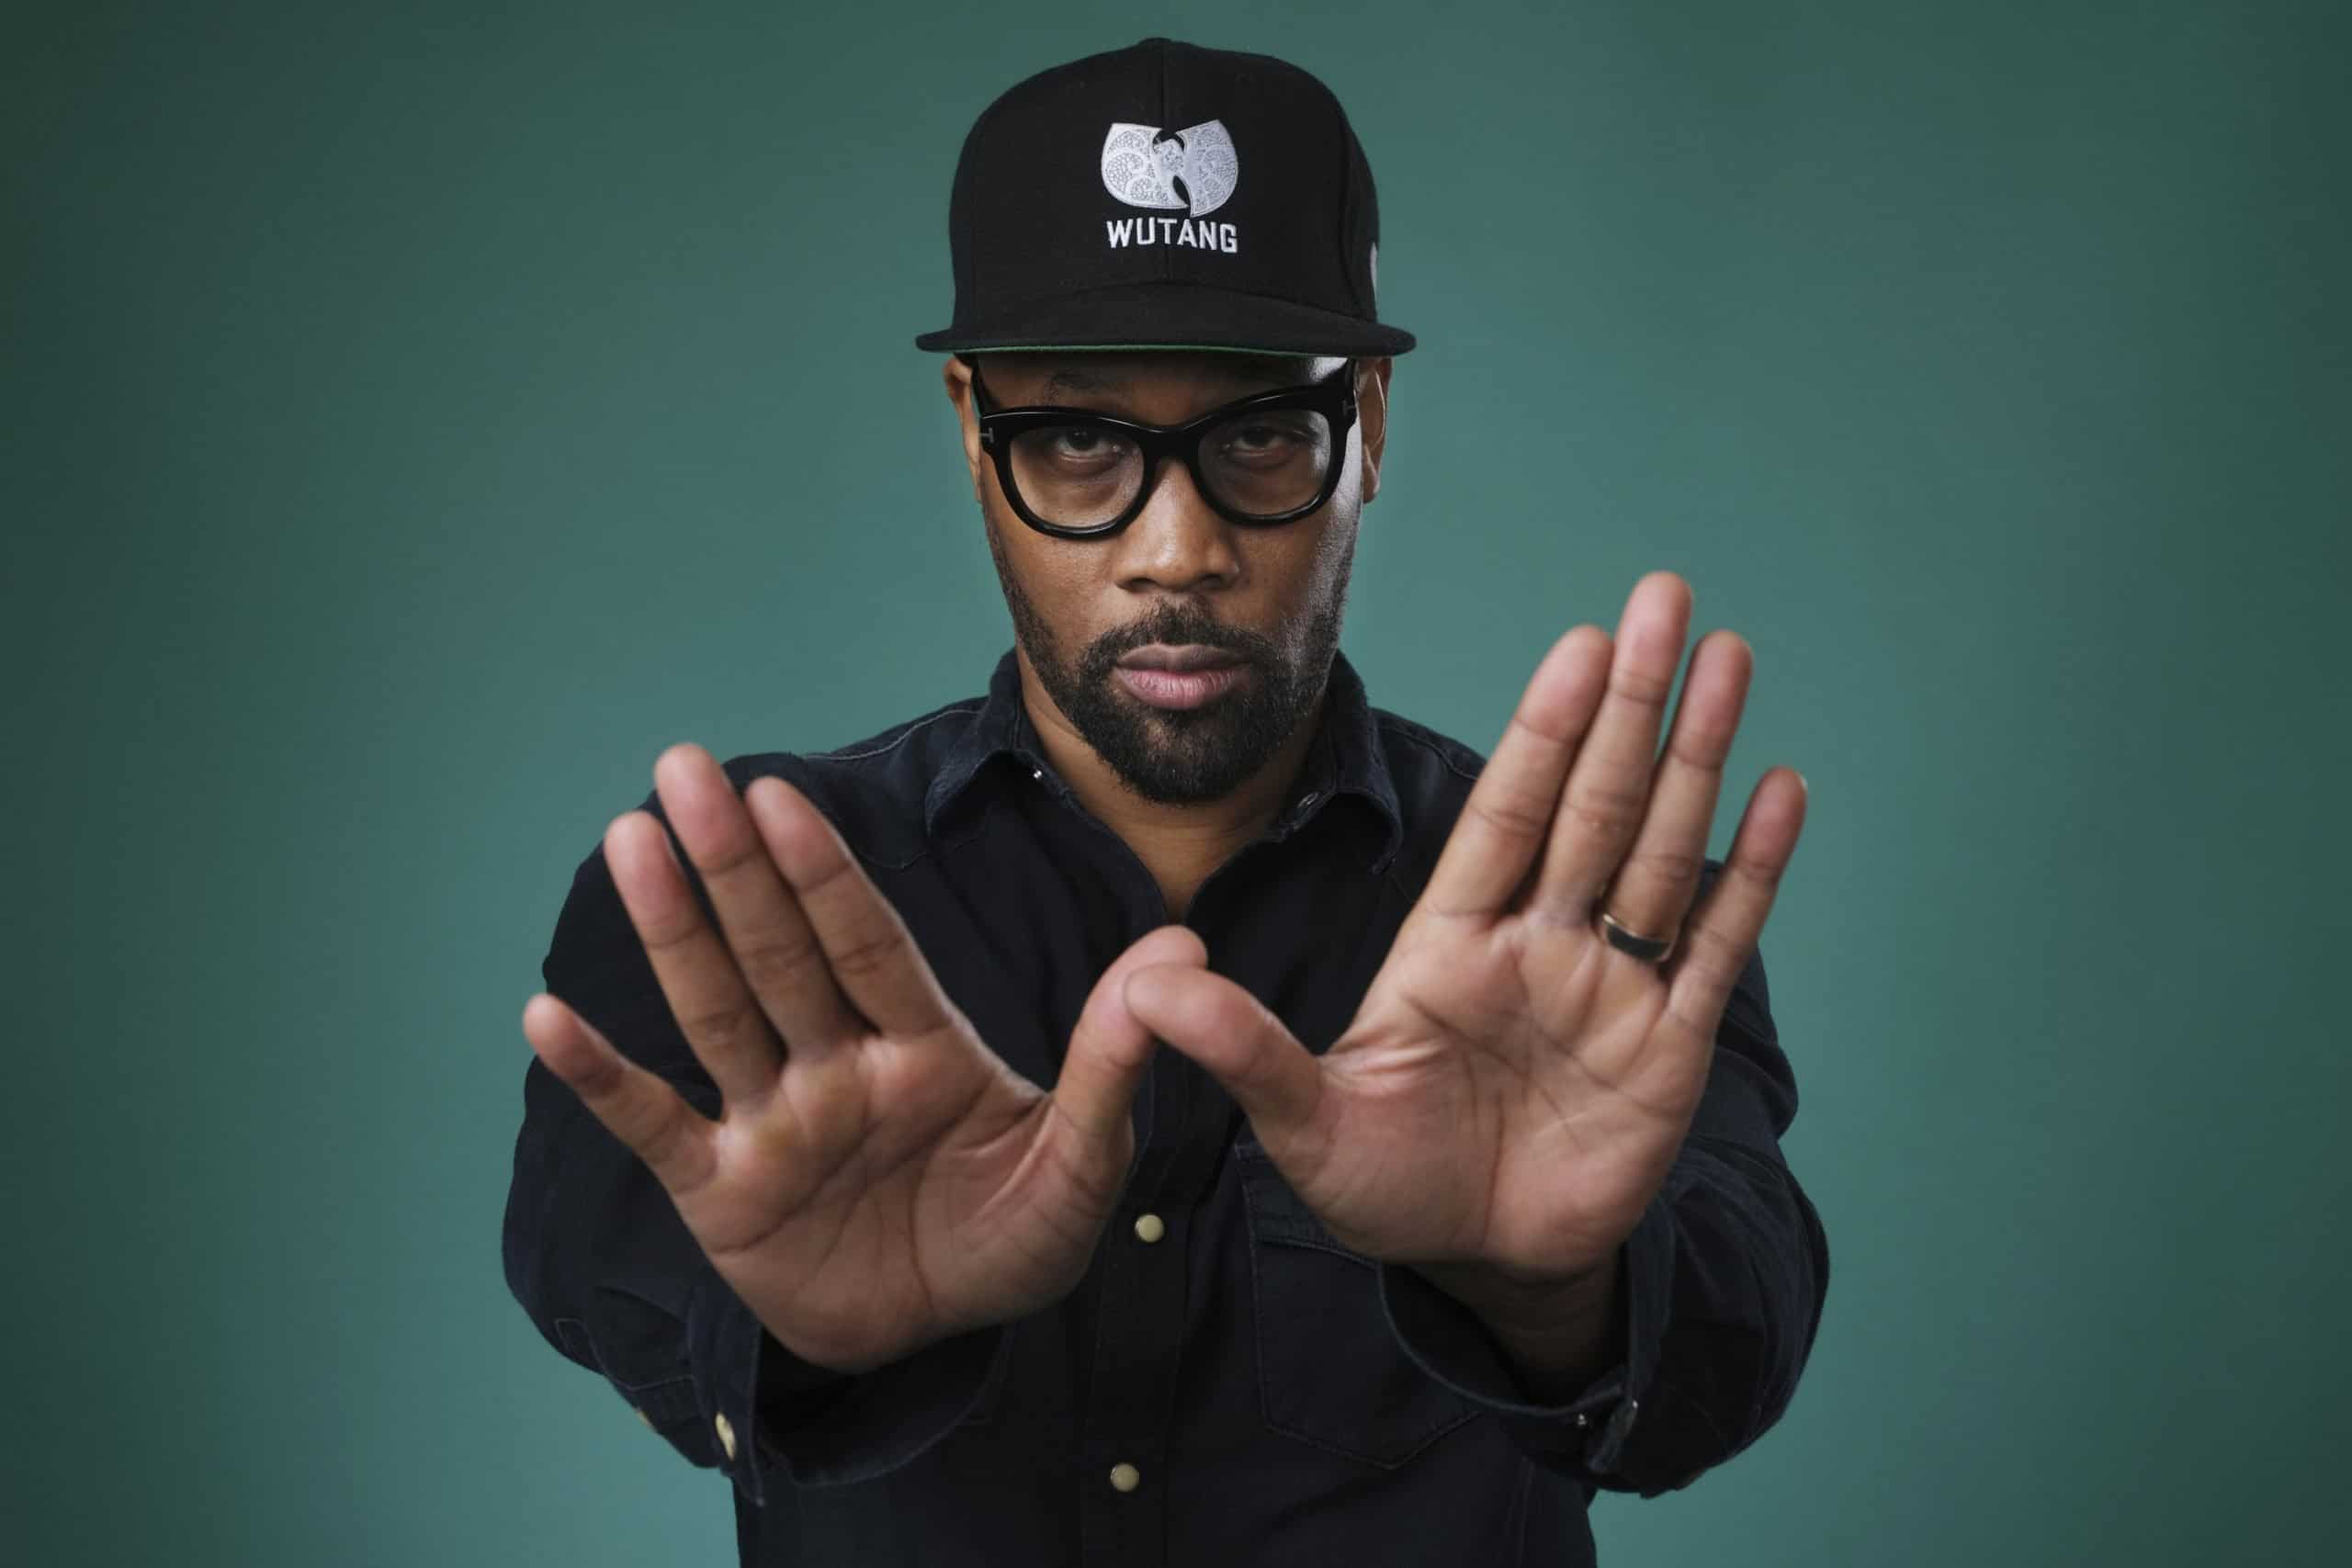 RZA from Wu-Tang Clan